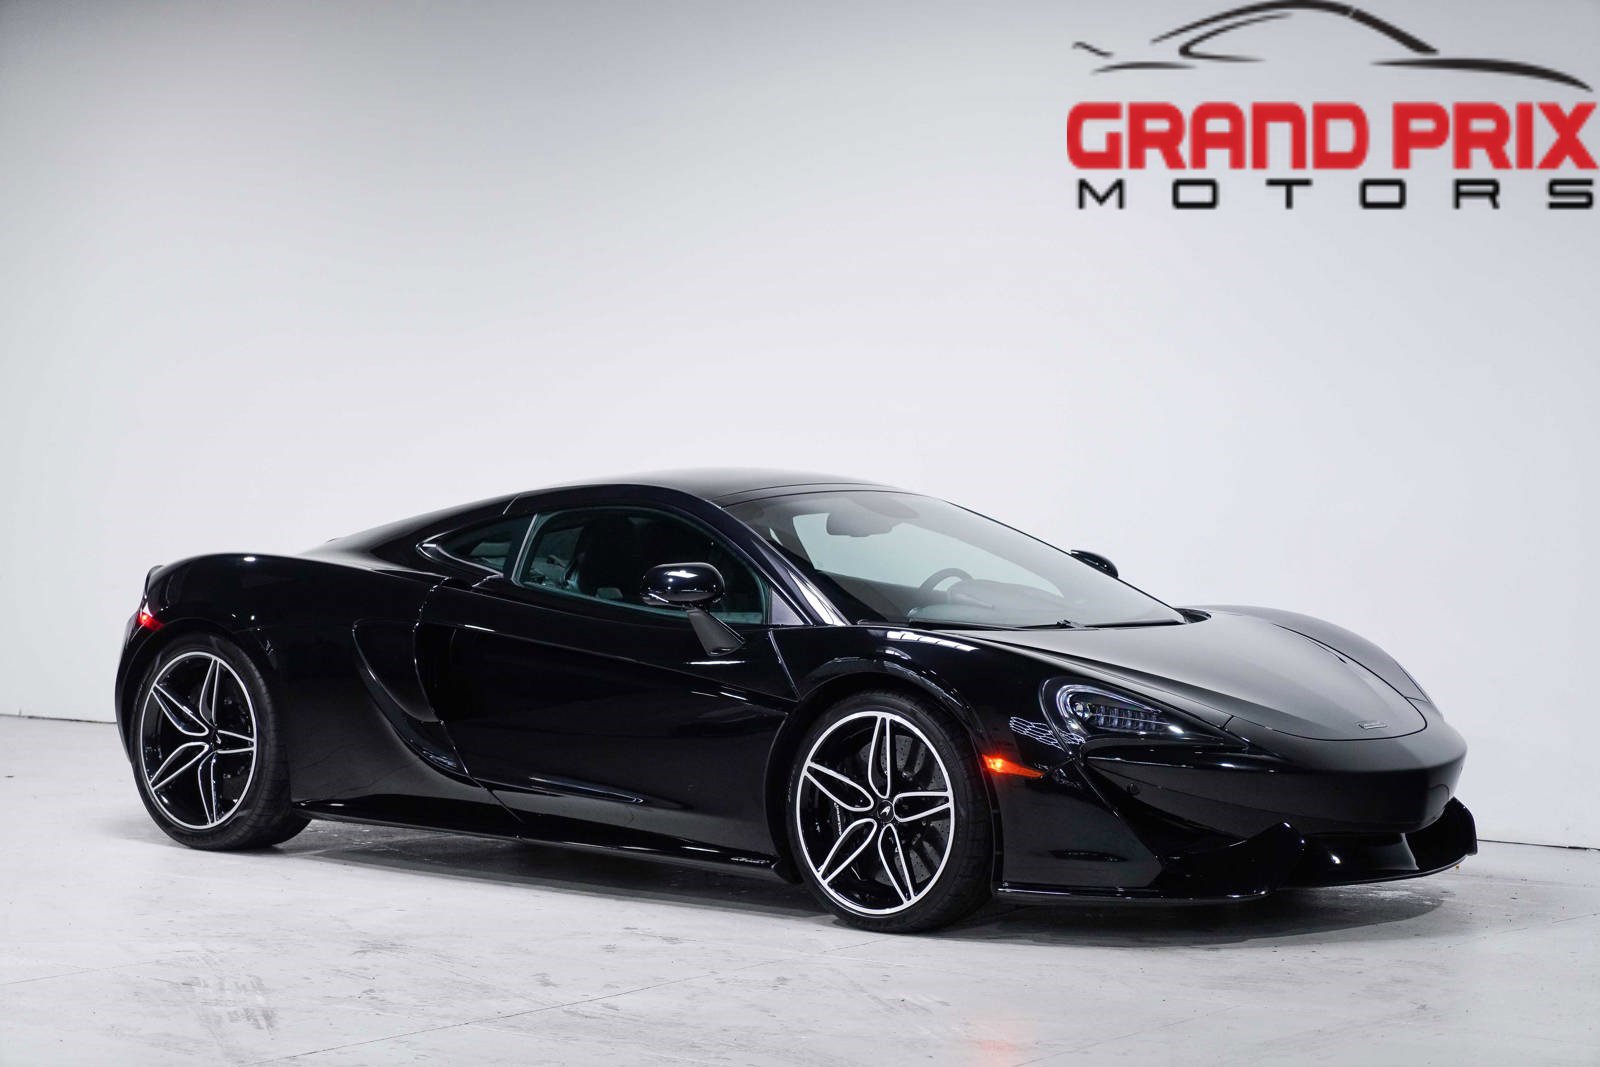 Used 2019 McLaren 570GT for Sale Right Now - Autotrader